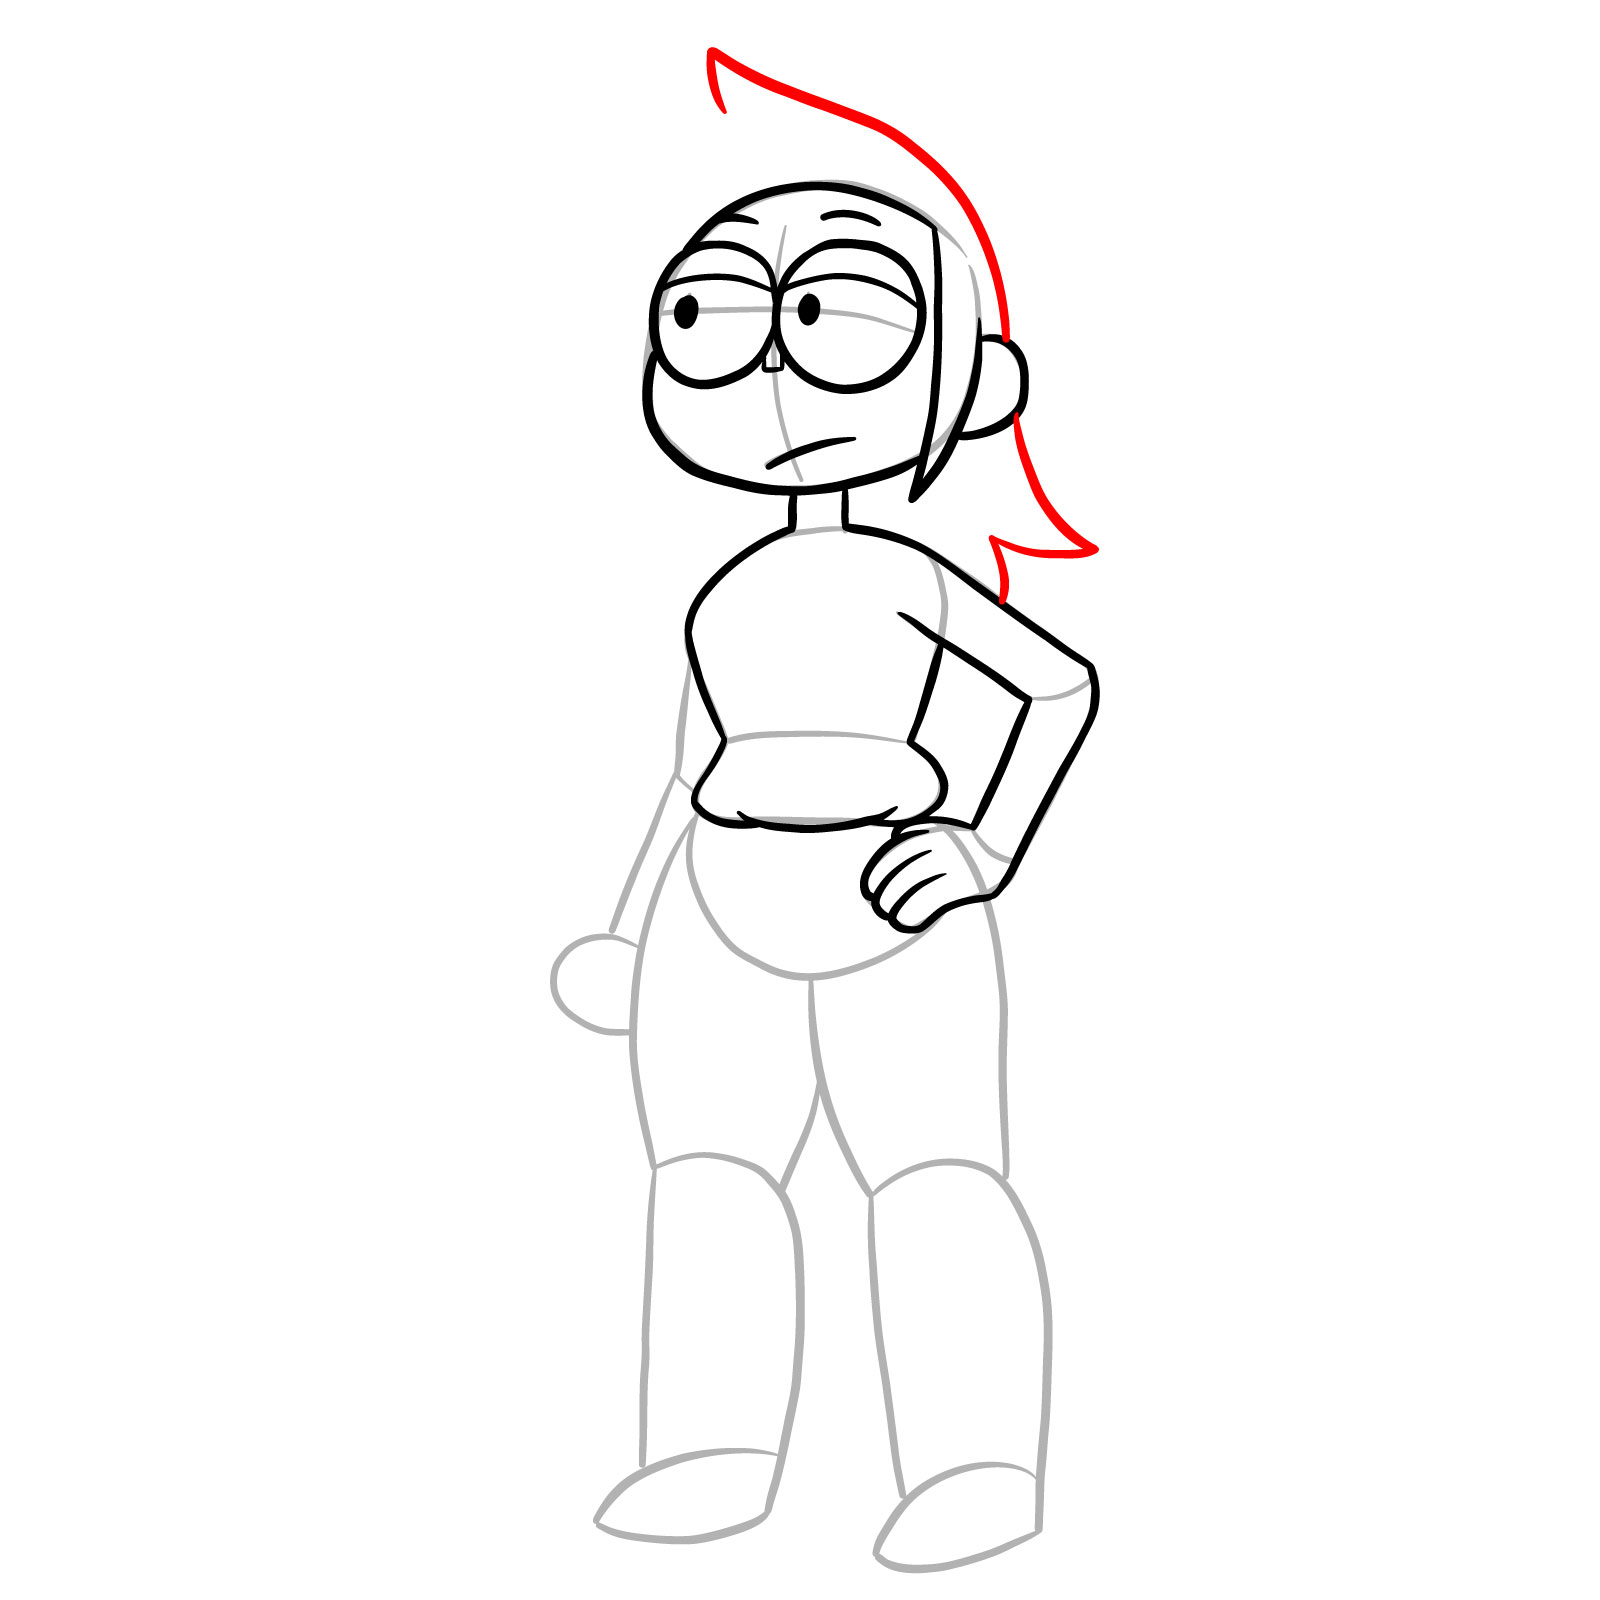 How to draw Actor Enid from OK K.O.! - step 13